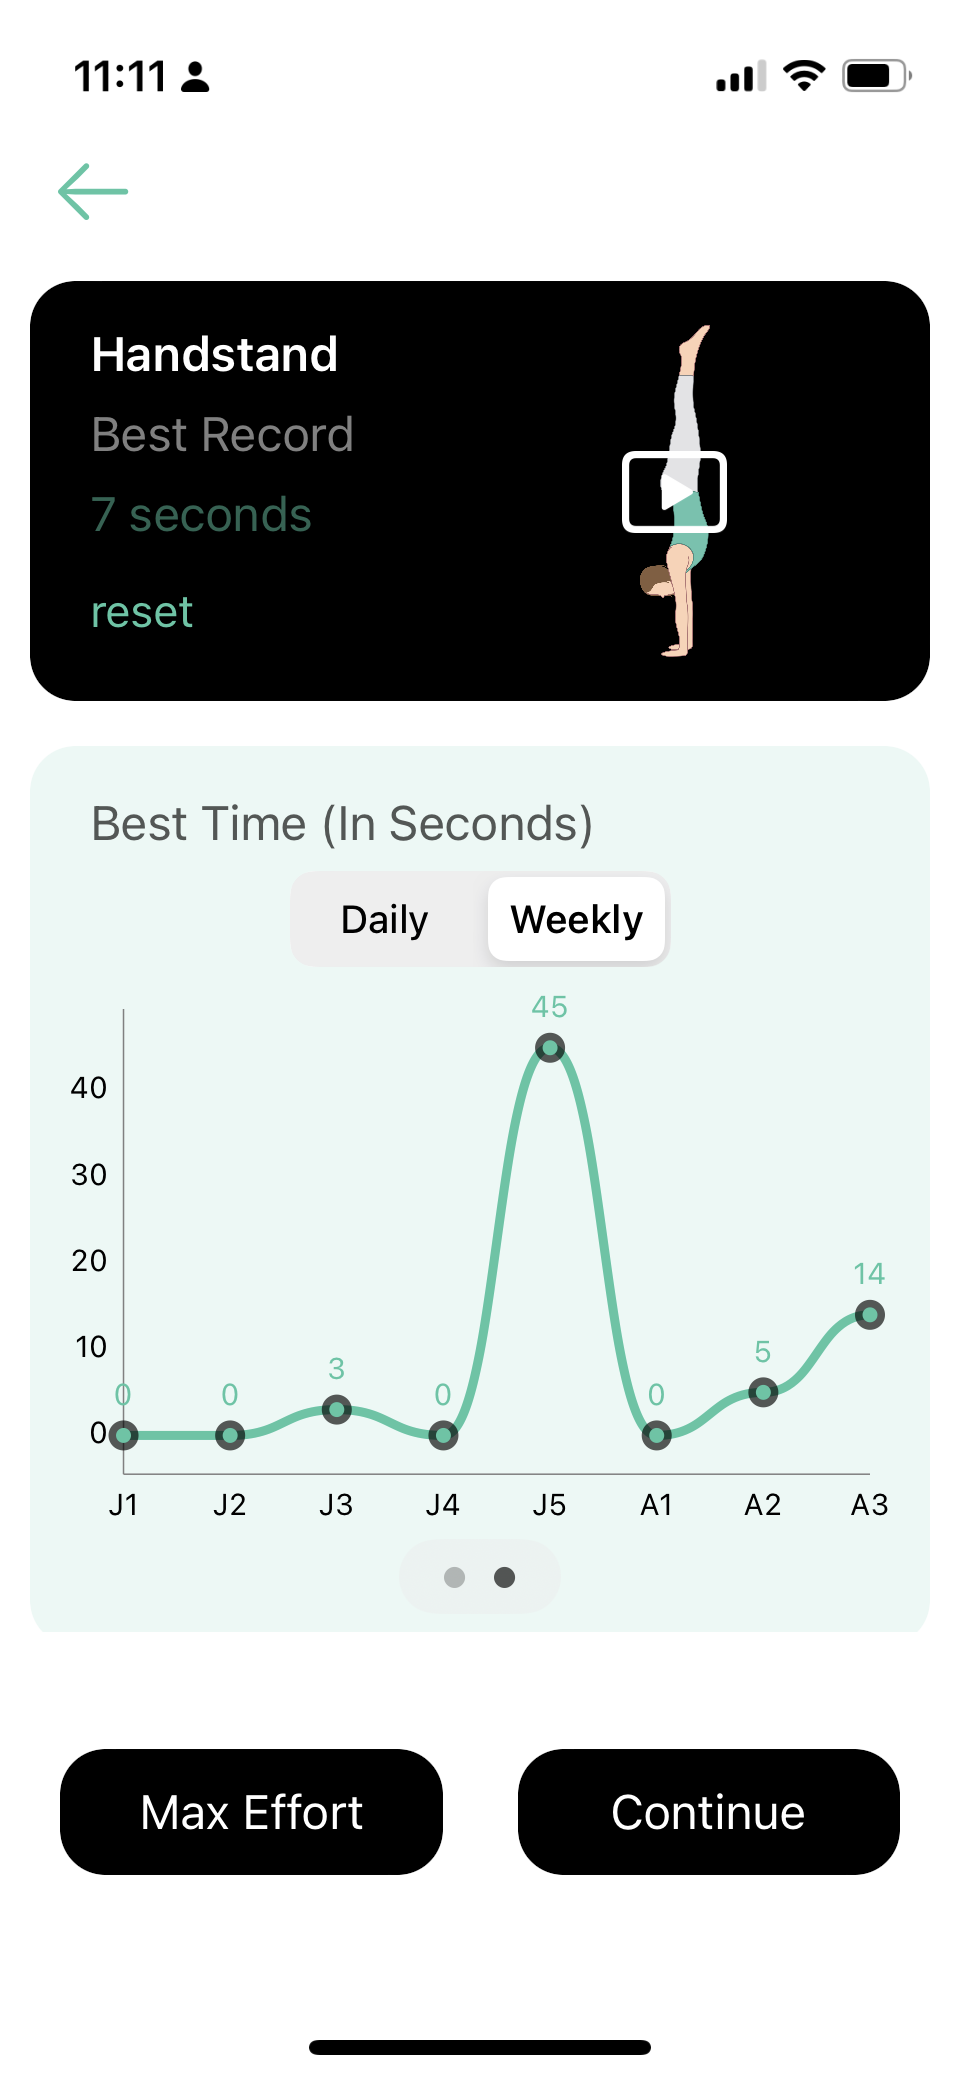 Stats Overview when starting Prilepin Workout